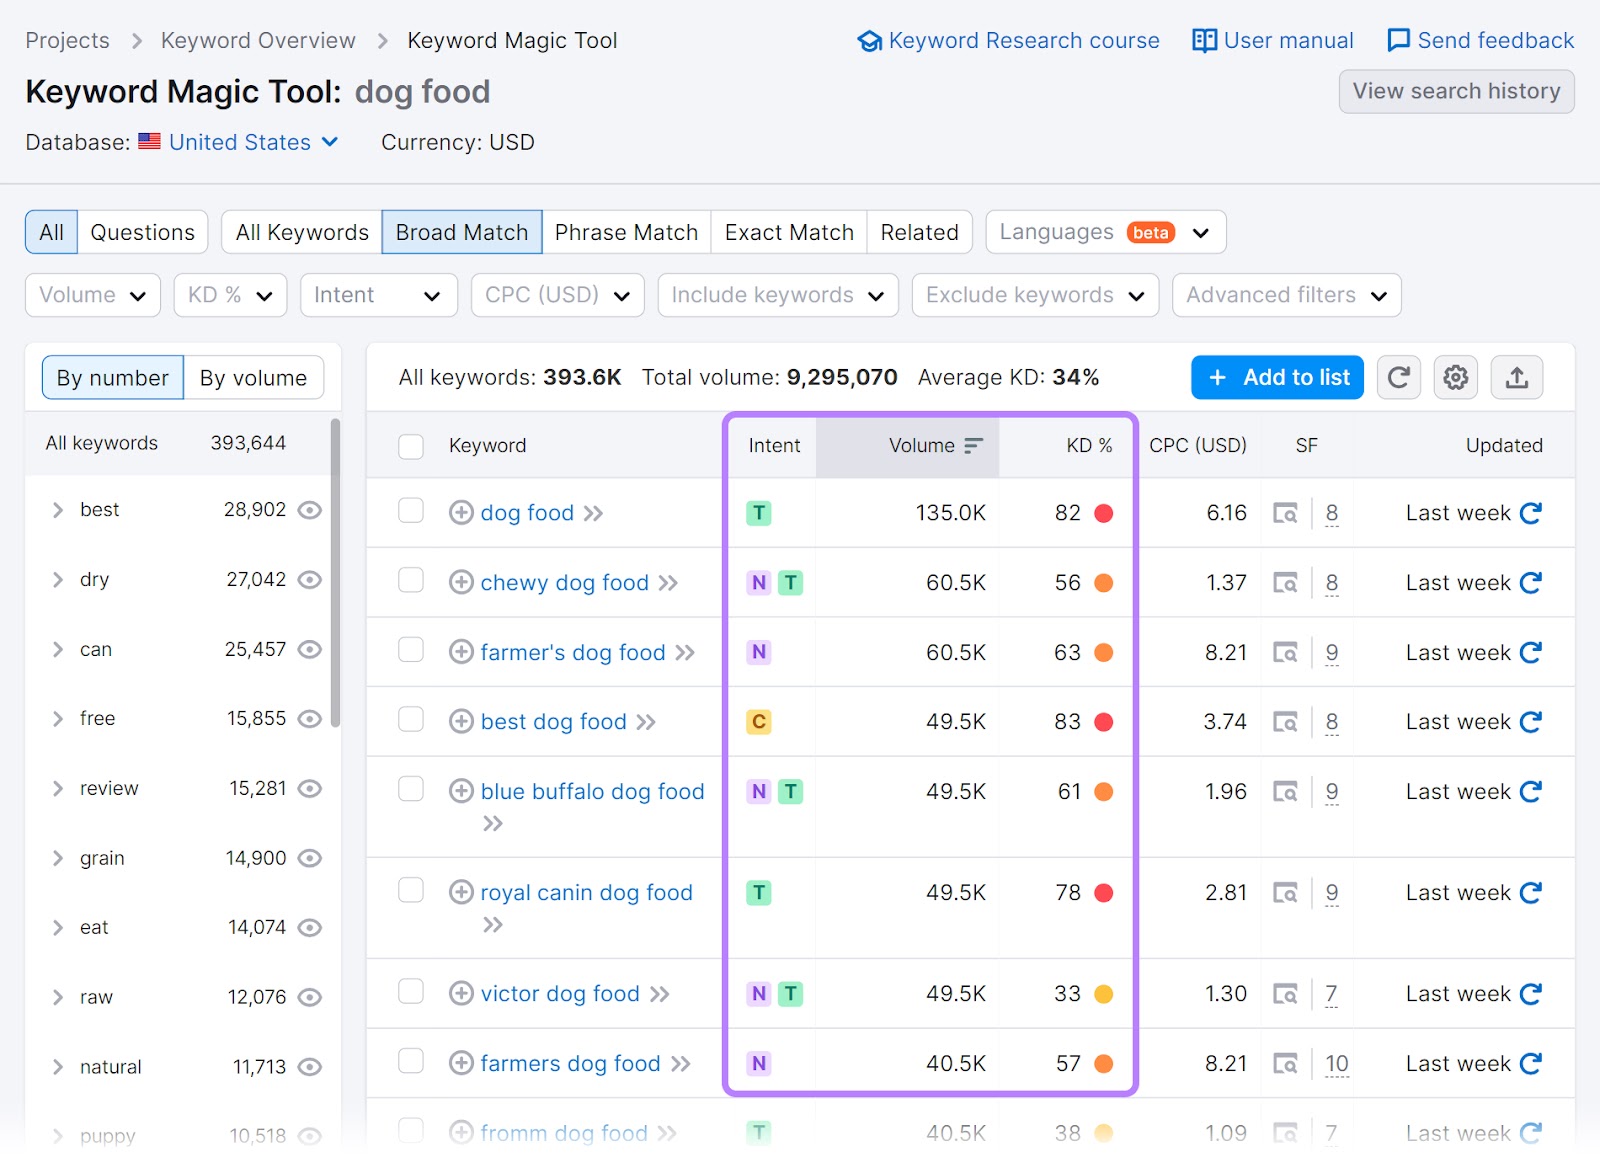 Keyword Magic Tool results for "dog food" with "Intent," "Volume," and "KD%" columns highlighted